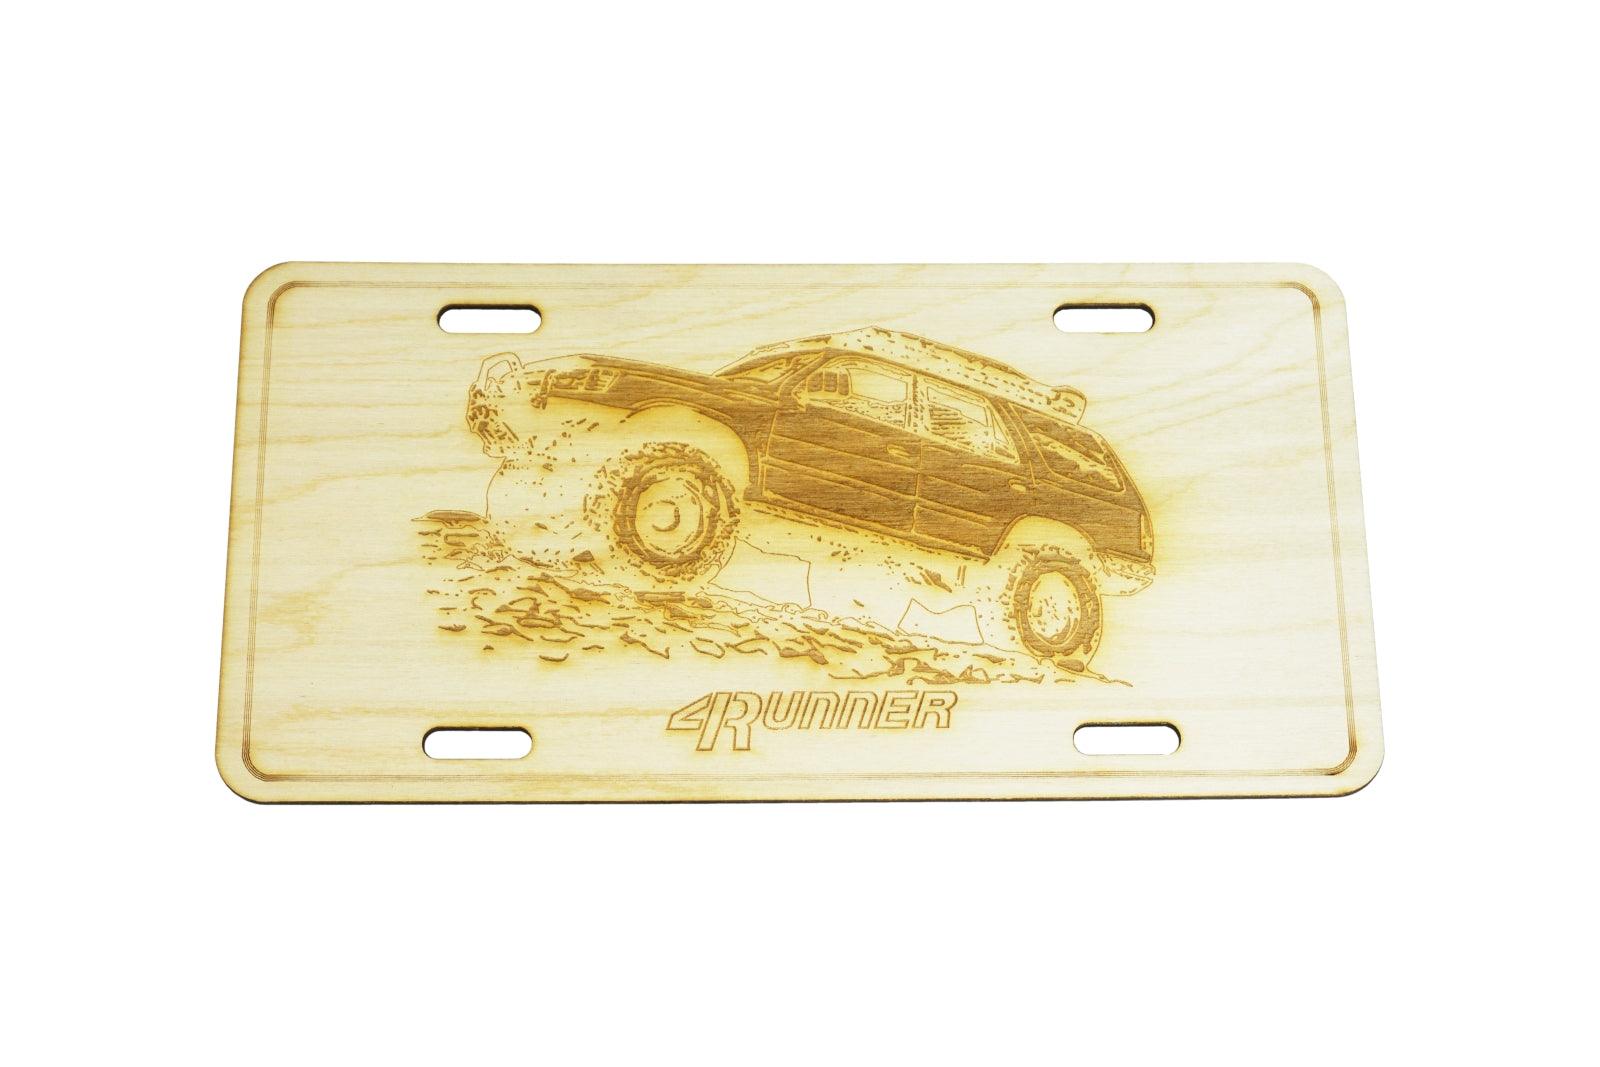 ZSPEC Toyota 4Runner Cut-Away License Plate, Birch, Ornamental  1/8' Birch Plywood construction.  Approximately the same size as a traditional license plate ZSPEC Design LLC Toyota 4runner truck